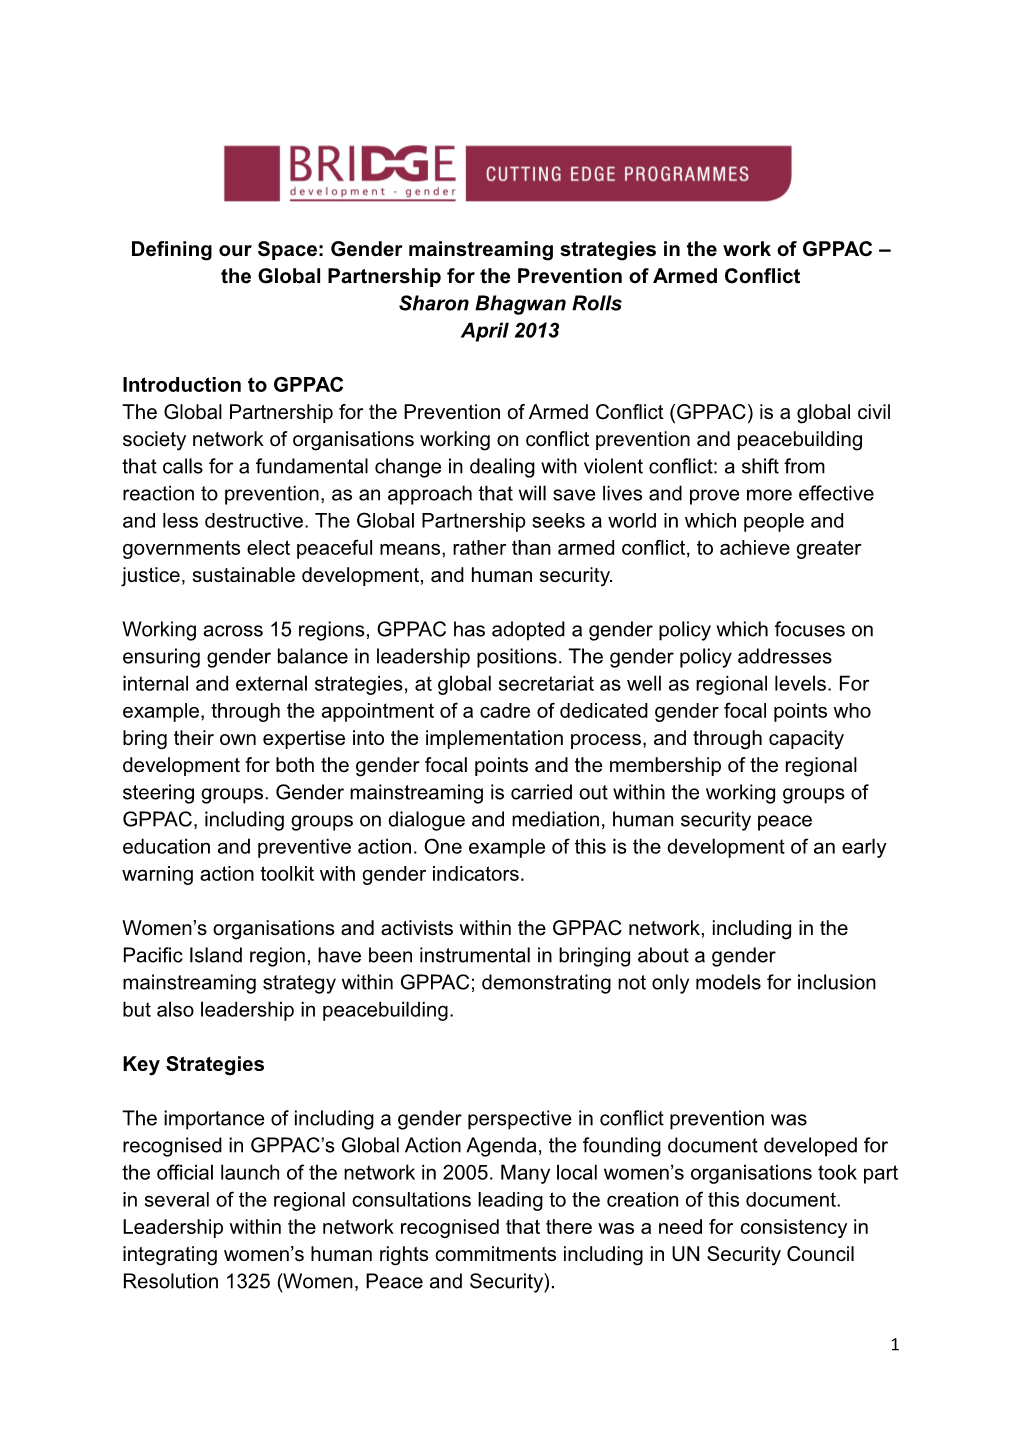 Defining Our Space: Gender Mainstreaming Strategies in the Work of GPPAC the Global Partnership